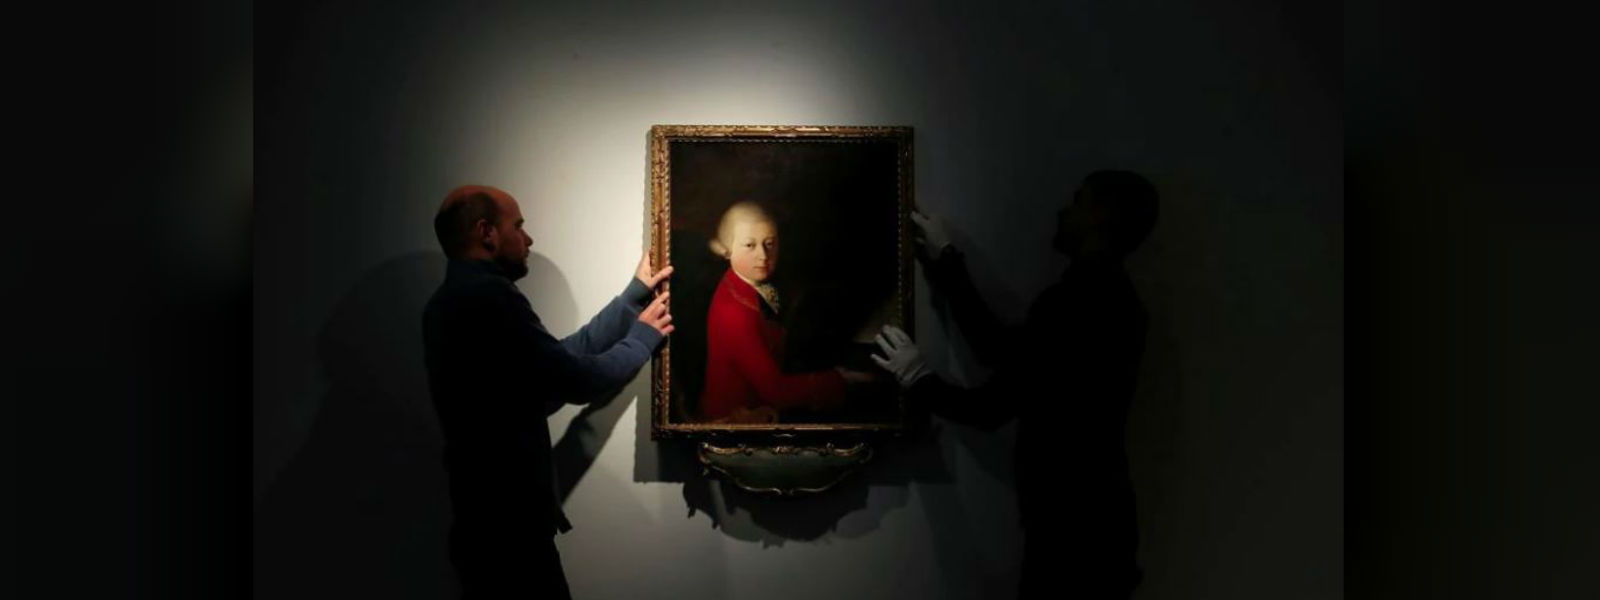 Portrait of young Mozart could fetch up to €1.2mn